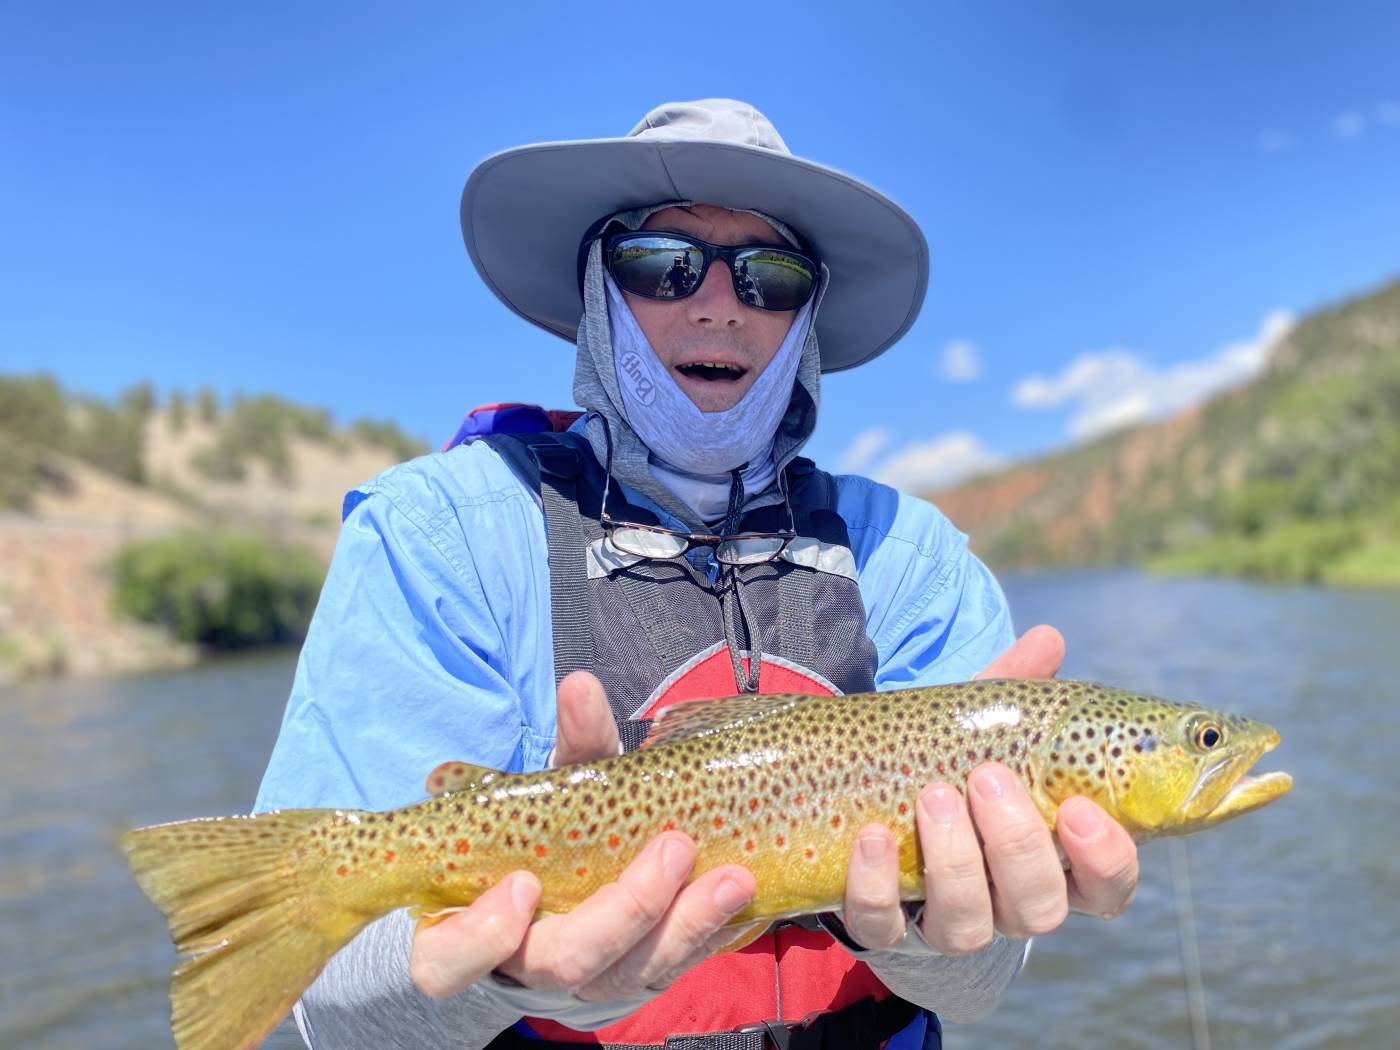 50 Best Places for Fly Fishing in Colorado: Map & Guide